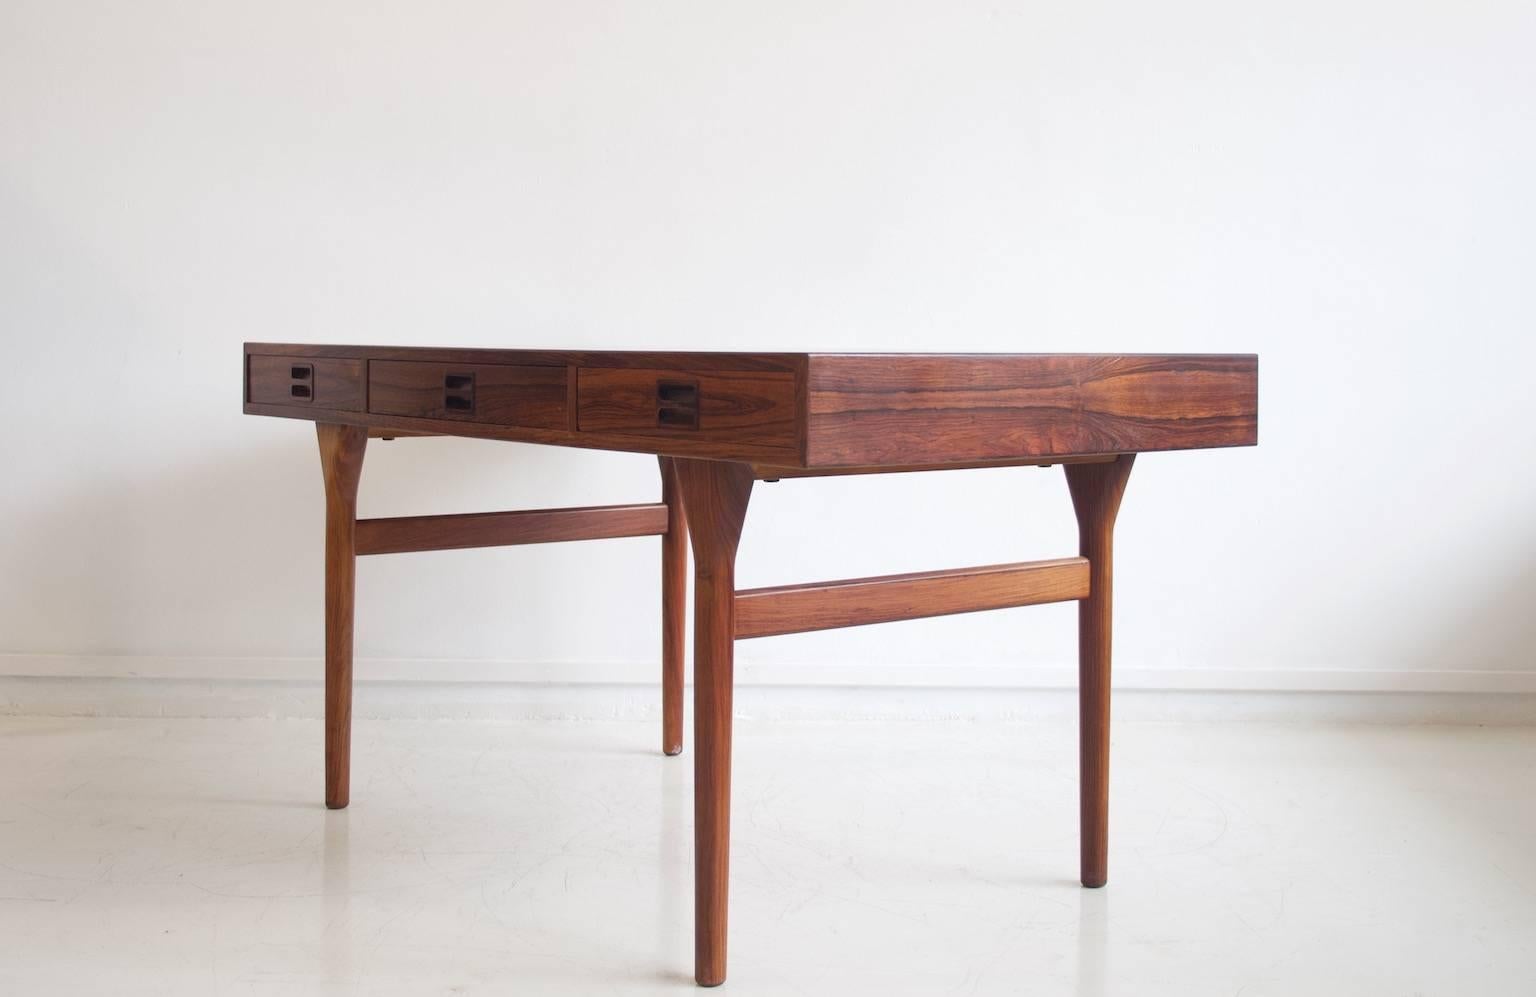 Desk designed by Nanna Ditzel for Søren Willadsen Møbelfabrik before 1958. Frame made of solid rosewood, surfaces with veneer, fitted with three drawers made of beech. Restored, very good condition, shows only minimal age-related wear.